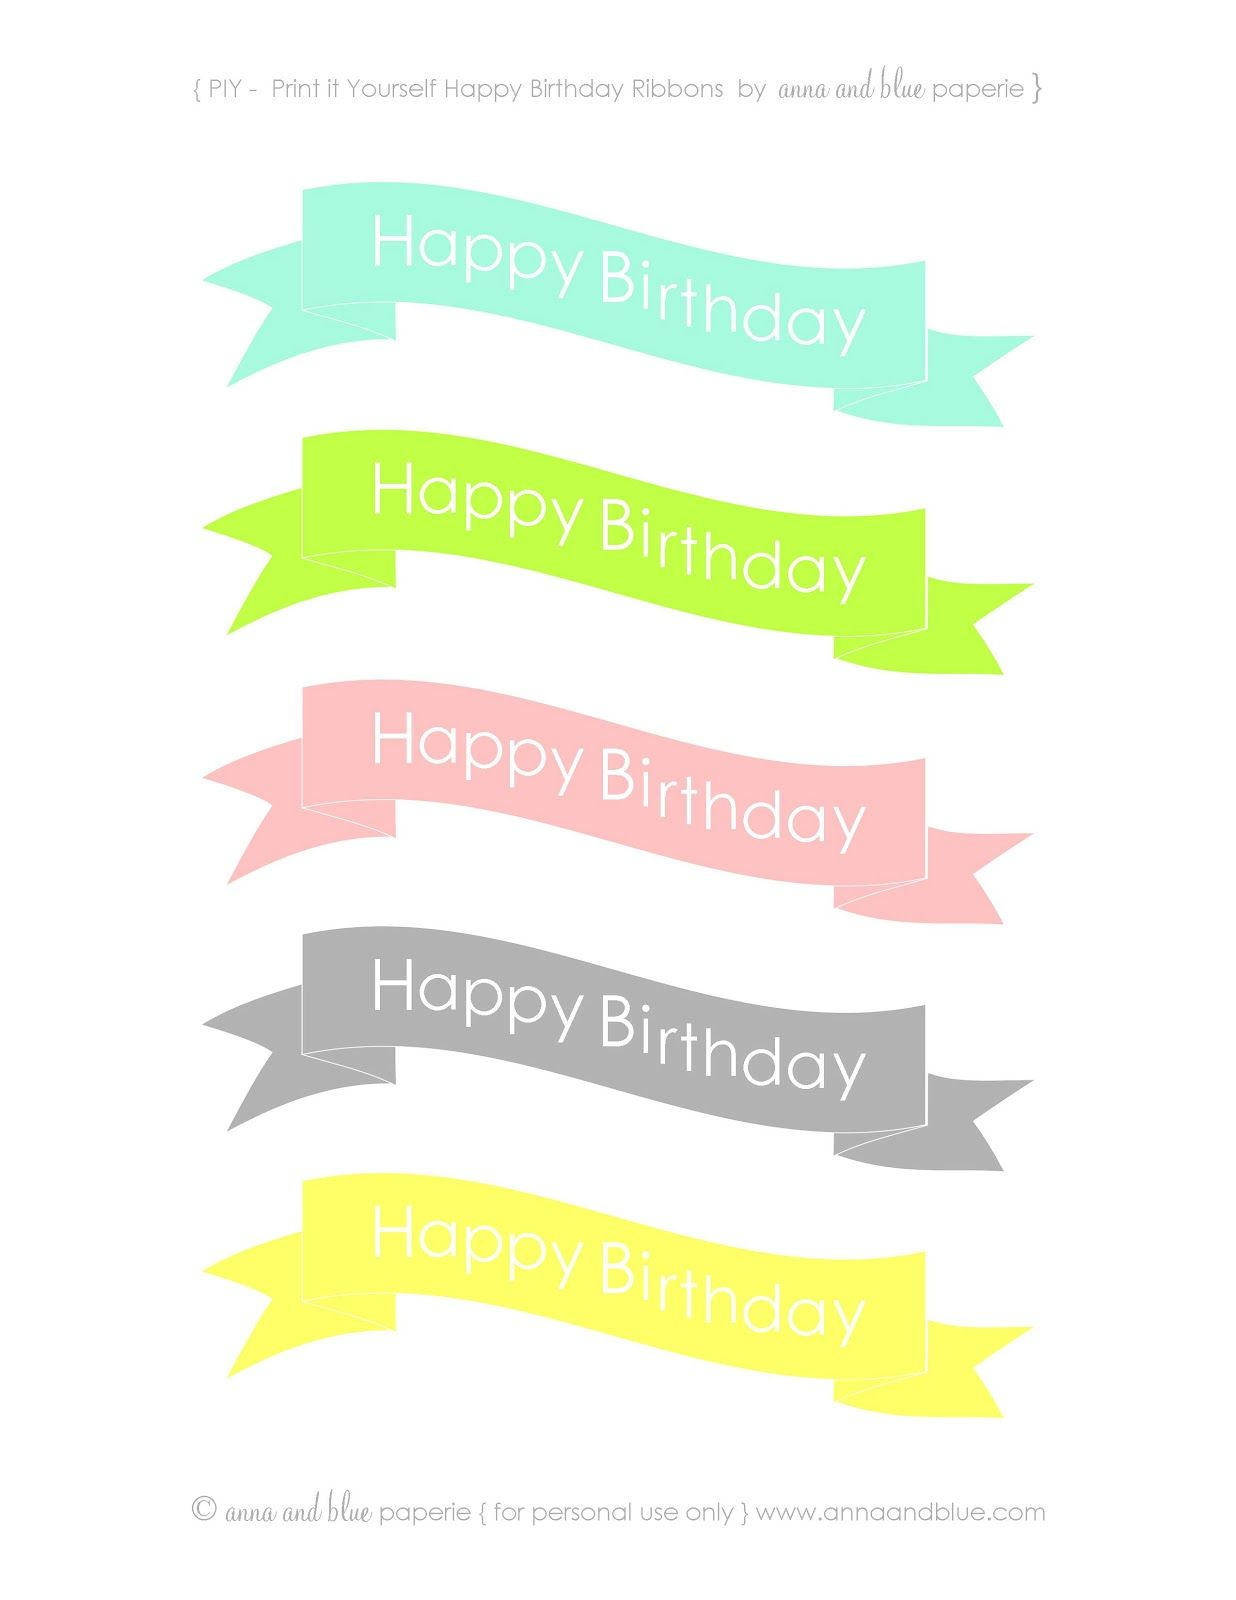 Anna And Blue Paperie: {Free Printable} Happy Birthday Cake Banners - Free Printable Birthday Cake